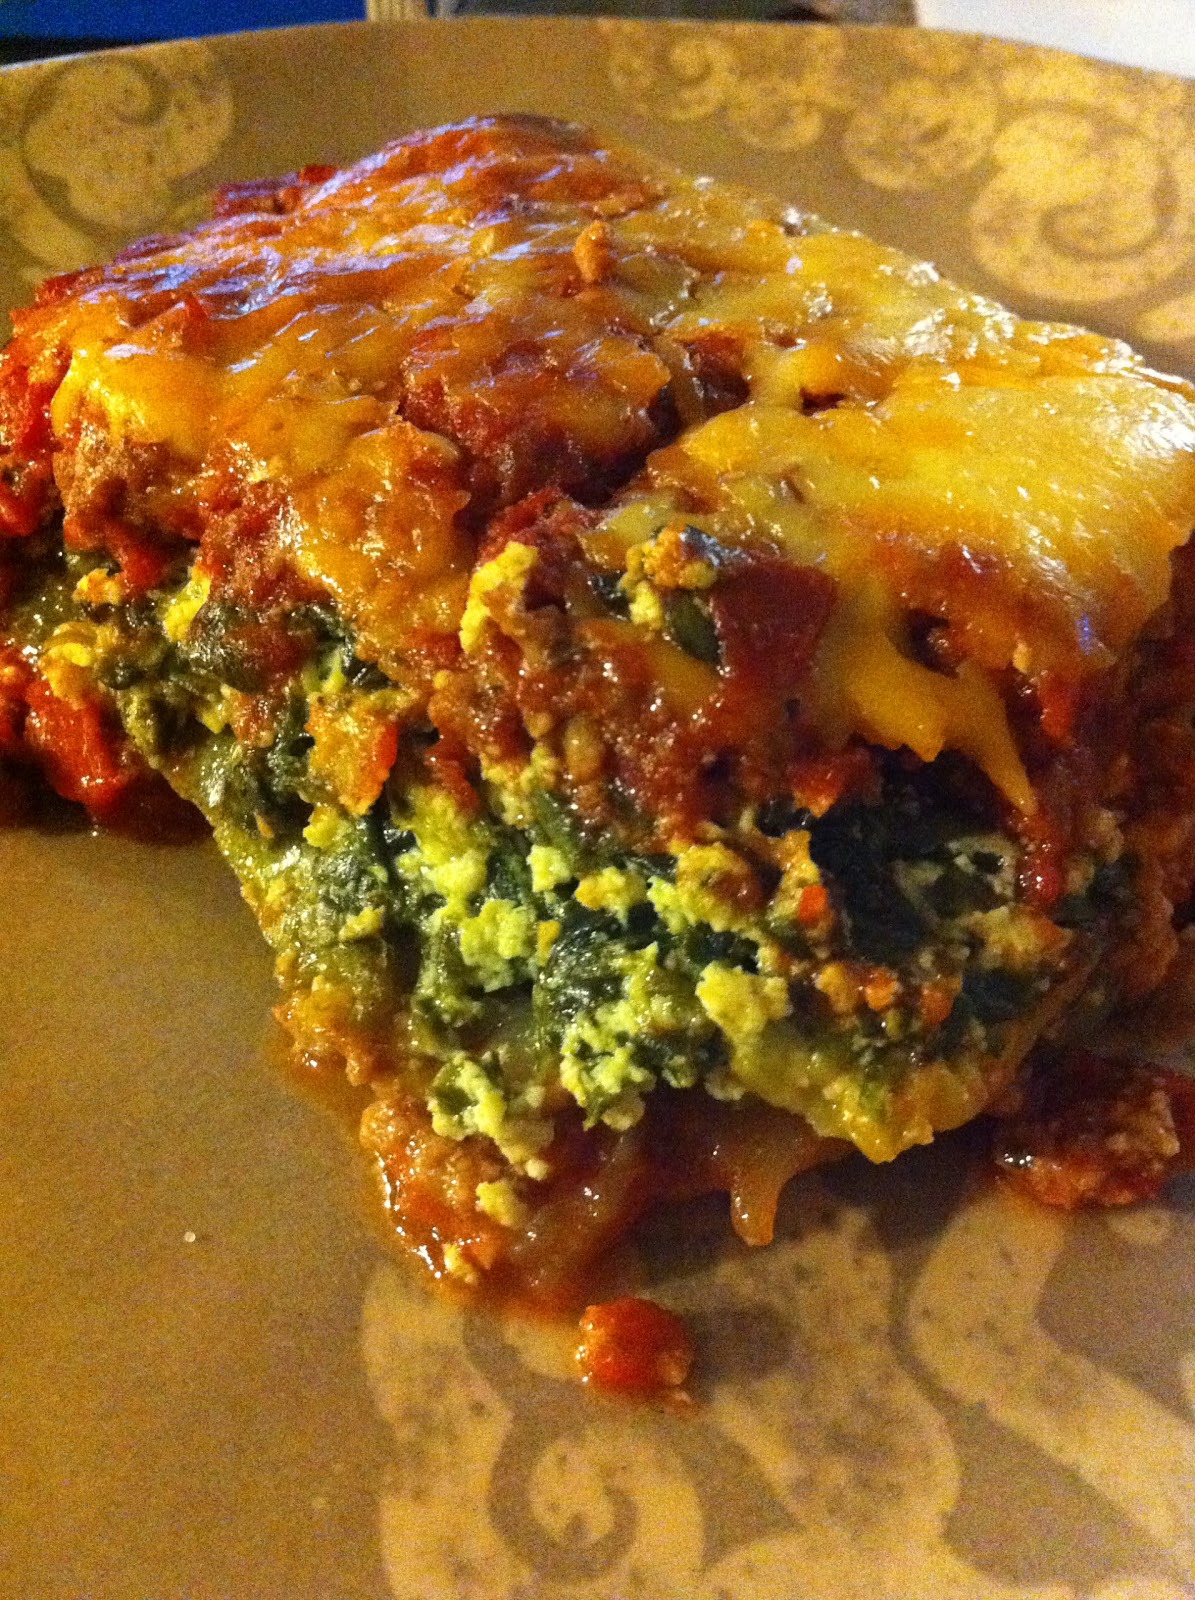 Satisfying Eats: Zucchini and Spinach Lasagna with a Spicy Meat Sauce